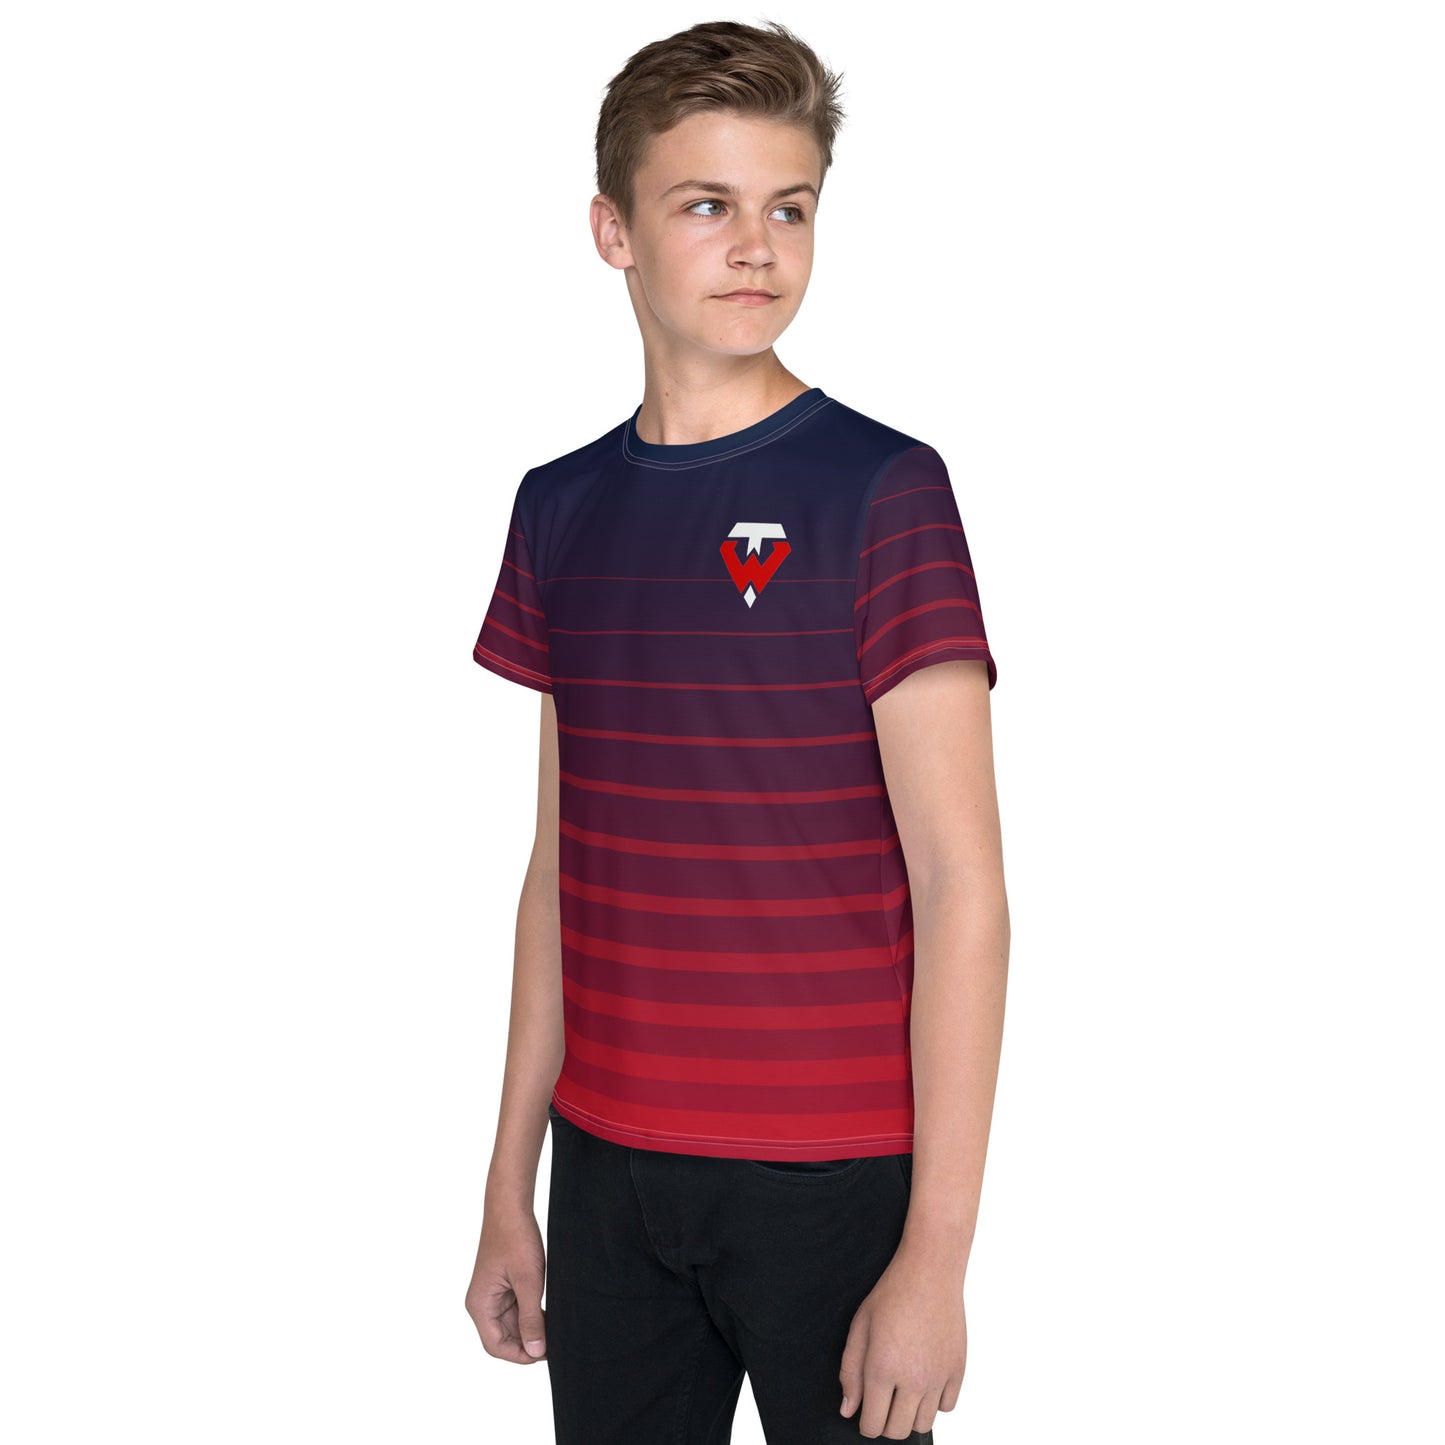 Tampa Warriors TW Seal Striped Youth Performance crew neck t-shirt